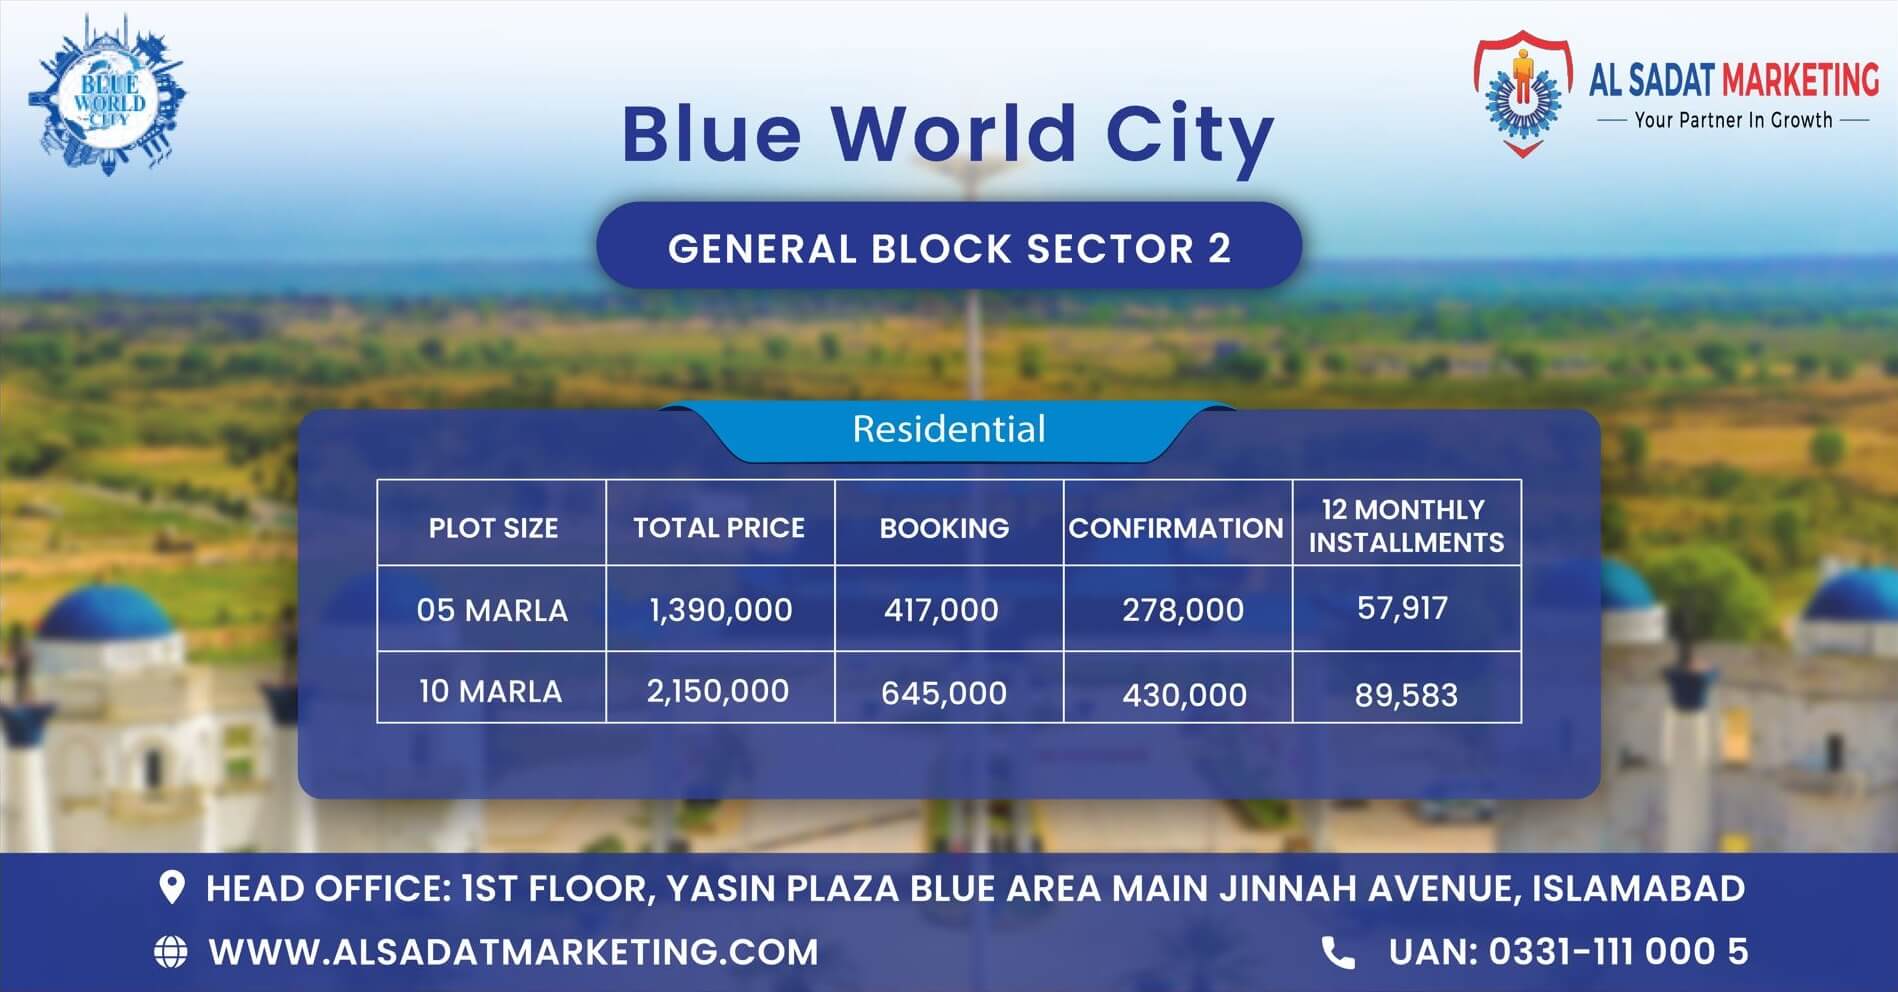 blue world city residential plots payment plan – blue world city islamabad residential plots payment plan – blue world city rawalpindi residential plots payment plan – blue world city general block sector 2 new payment plan – blue world city islamabad general block sector 2 new payment plan – blue world city rawalpindi general block sector 2 new payment plan – blue world city payment plan – blue world city islamabad payment plan - blue world city rawalpindi payment plan – blue world city– blue world city islamabad – blue world city rawalpindi– blue world city housing society – blue world city islamabad housing society – blue world city real estate project – blue world city islamabad real estate project - al sadat marketing - alsadat marketing - al-sadat marketing